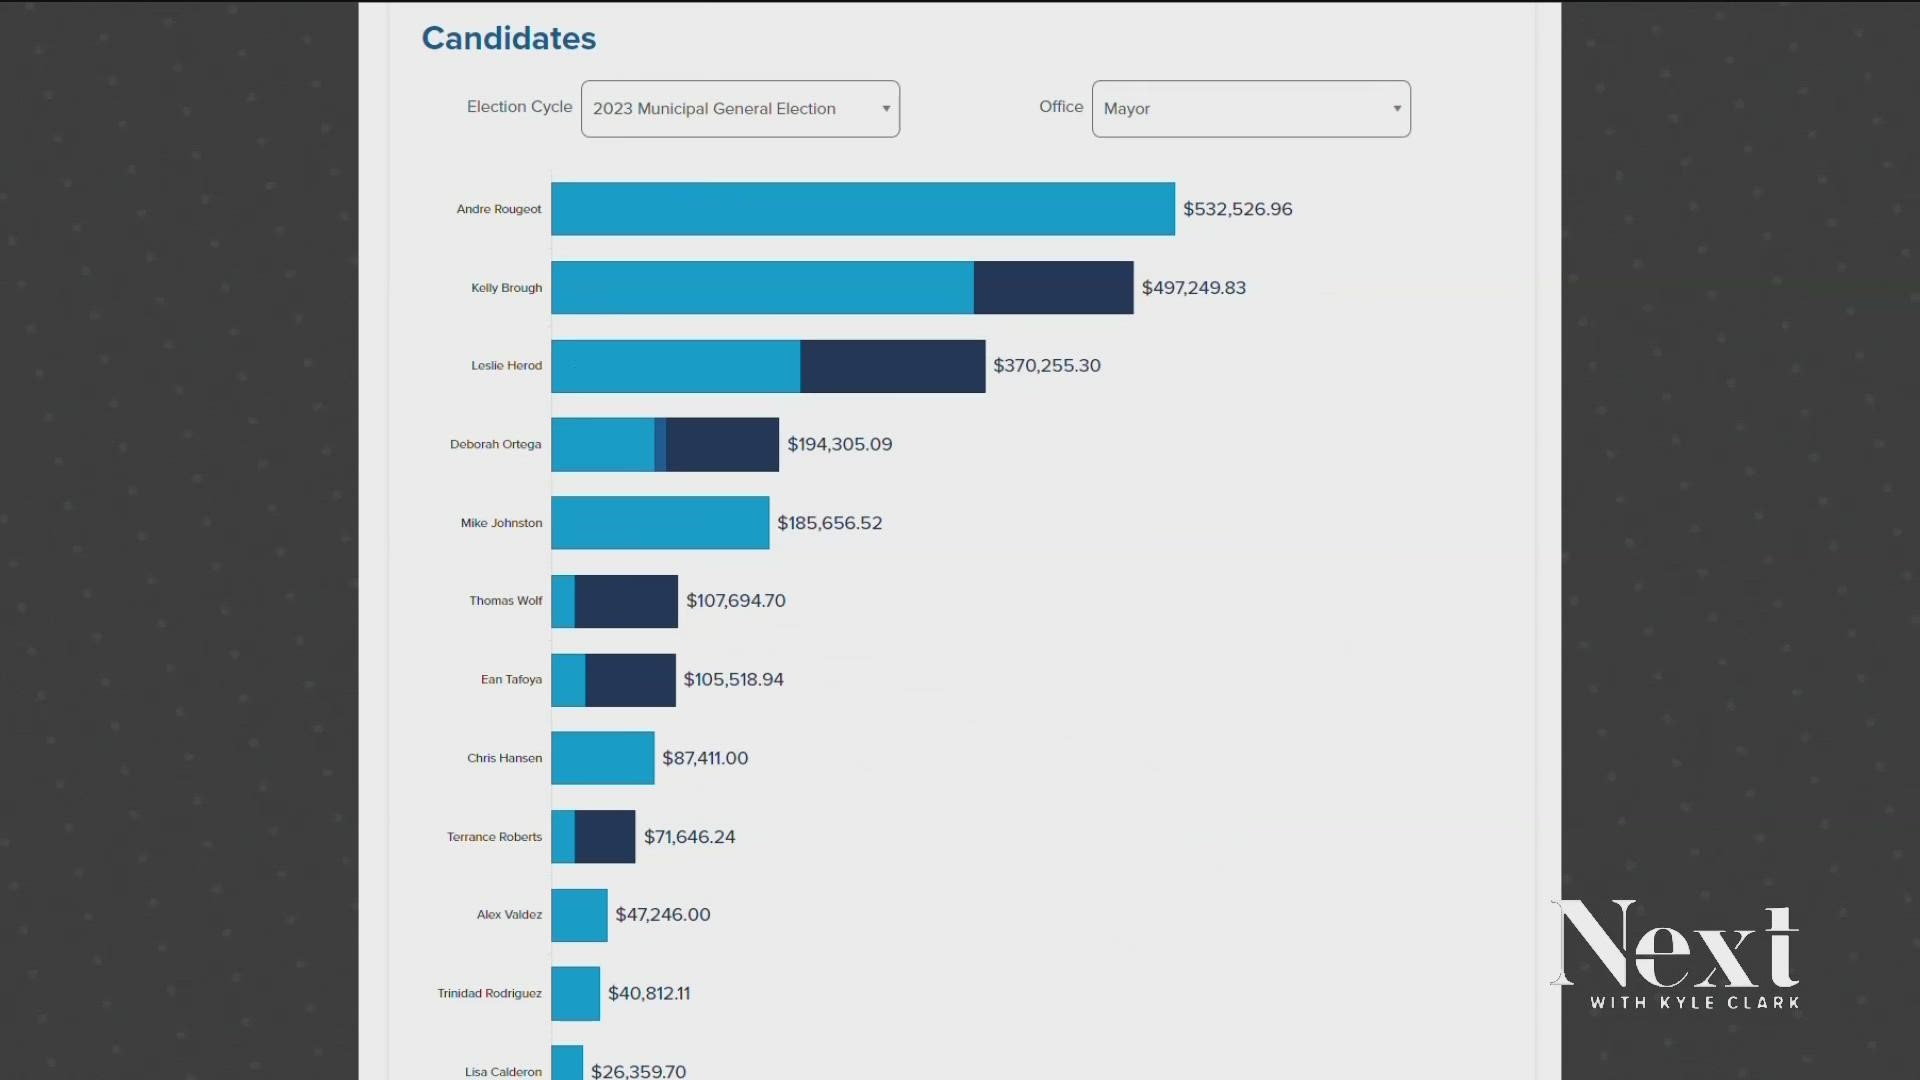 The top fundraiser in the race for Denver Mayor has one big donor... himself. Some other candidates aren't too far behind, and fair election funds are helping out.